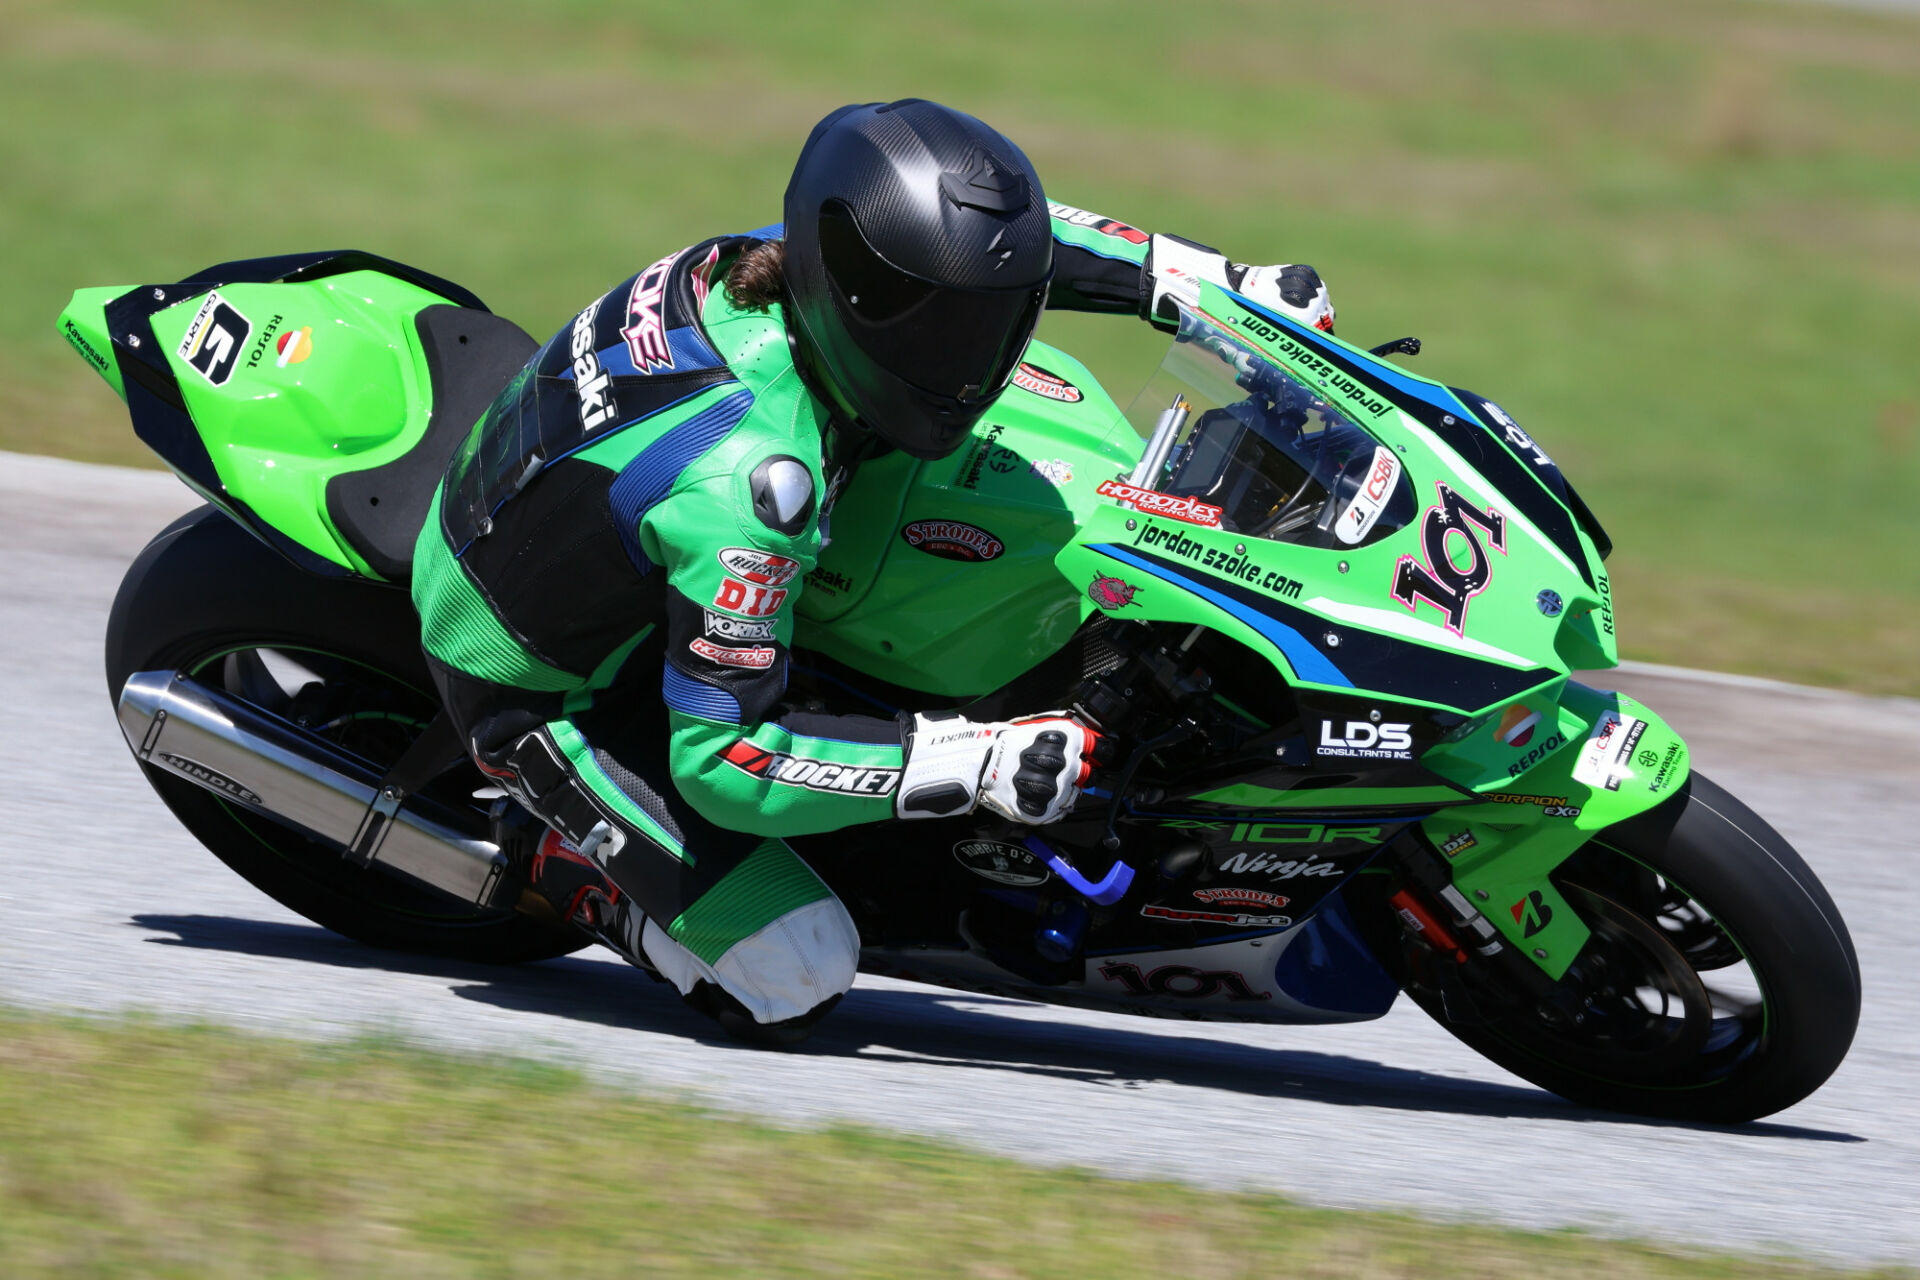 Jordan Szoke (101) was fastest after the first day of Bridgestone CSBK testing at Jennings GP. Testing continues on Wednesday at the Florida circuit. Photo by Rob O'Brien, courtesy CSBK.